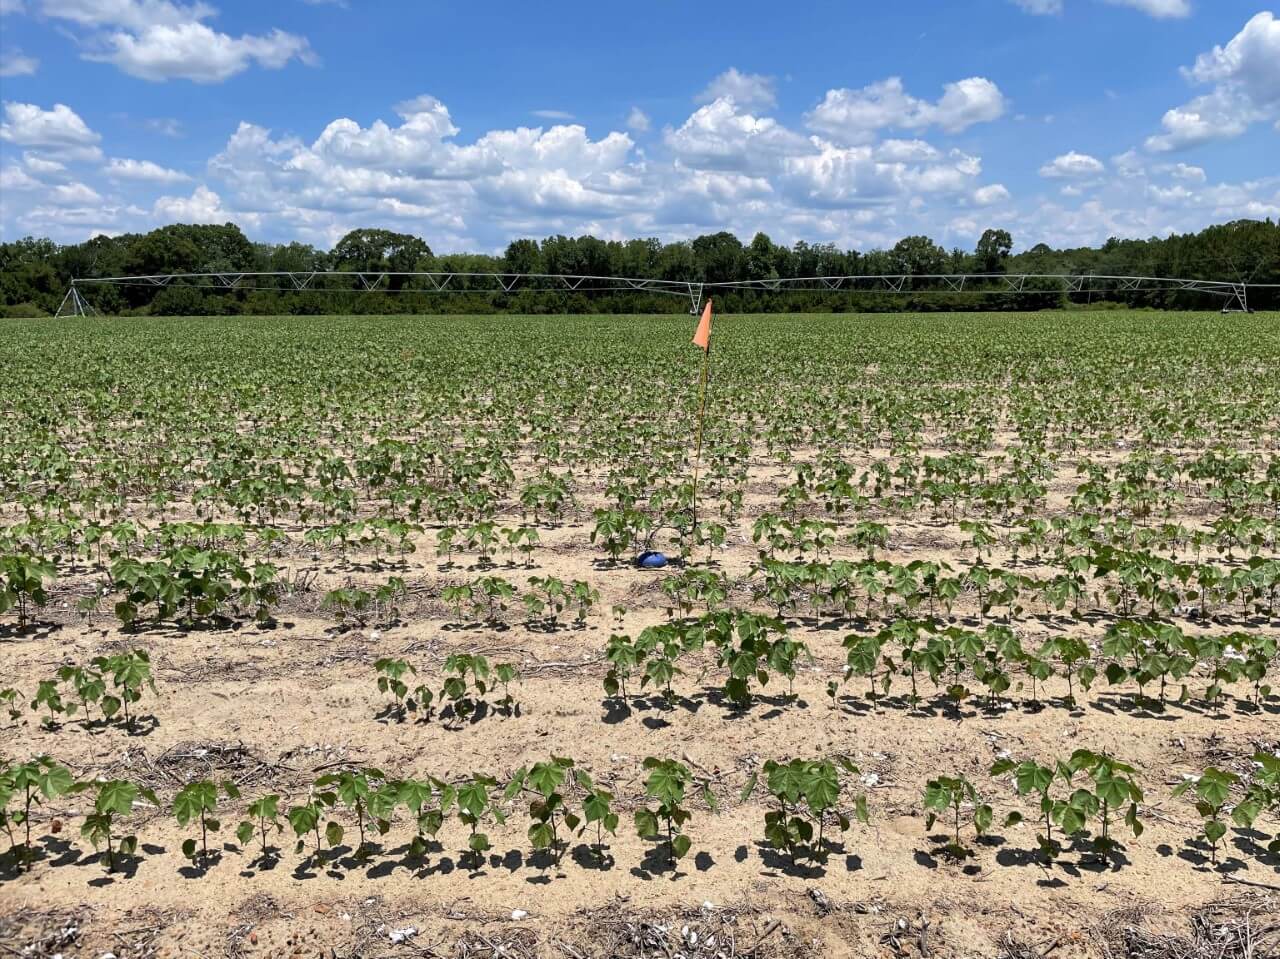 Newly purchased sensors will allow growers to monitor fertilizer movements in their soil over time and adjust irrigation and other production practices to minimize fertilizer loss through leaching.